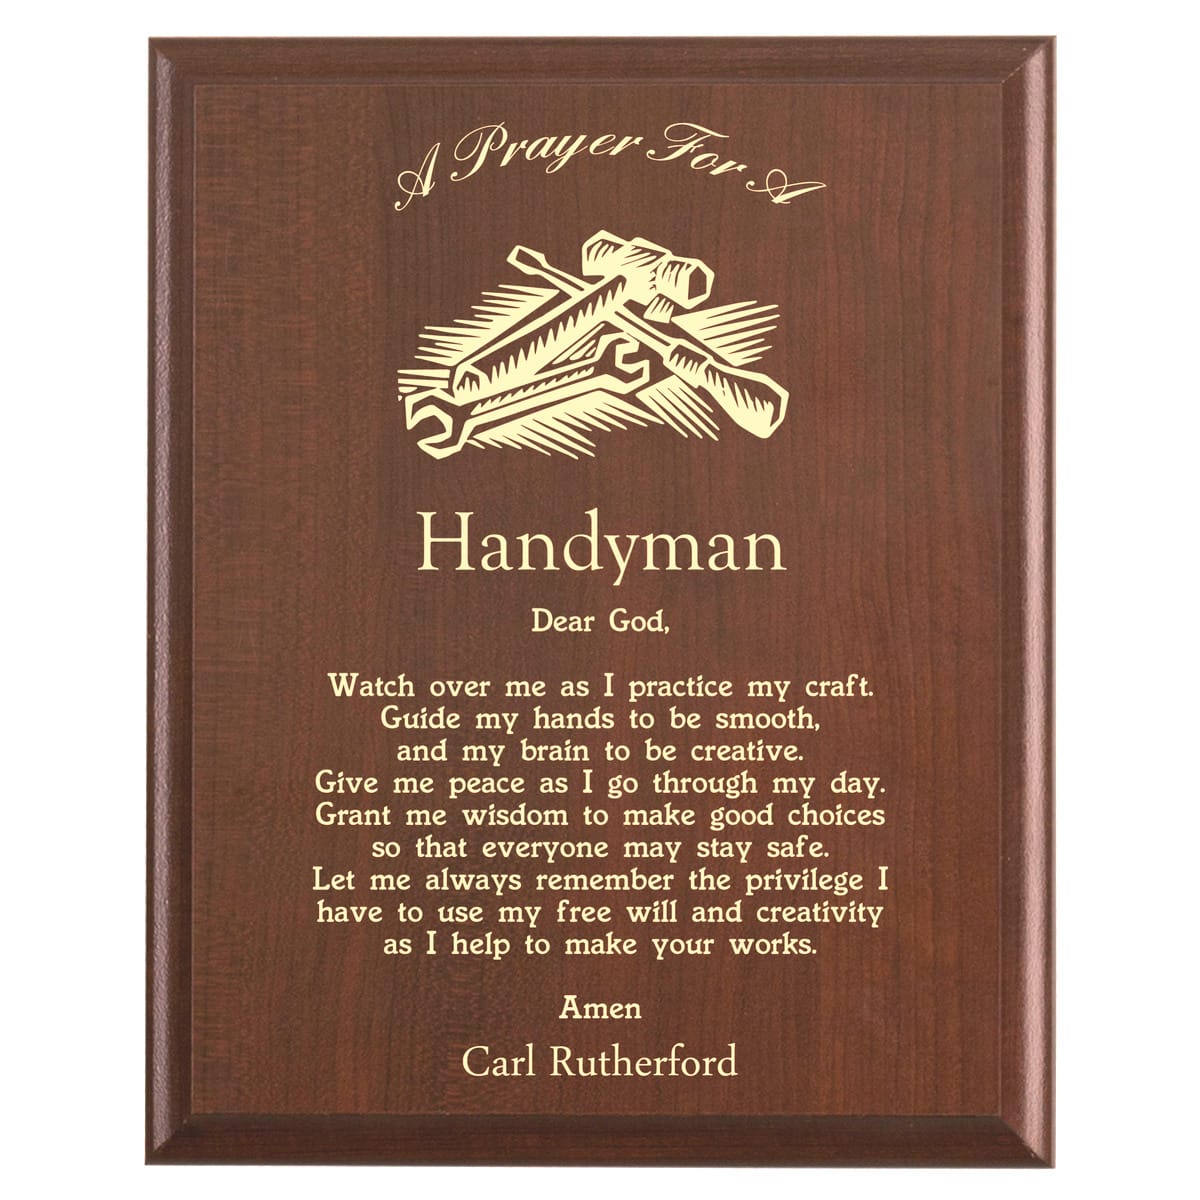 Plaque photo: Handyman Prayer Plaque design with free personalization. Wood style finish with customized text.